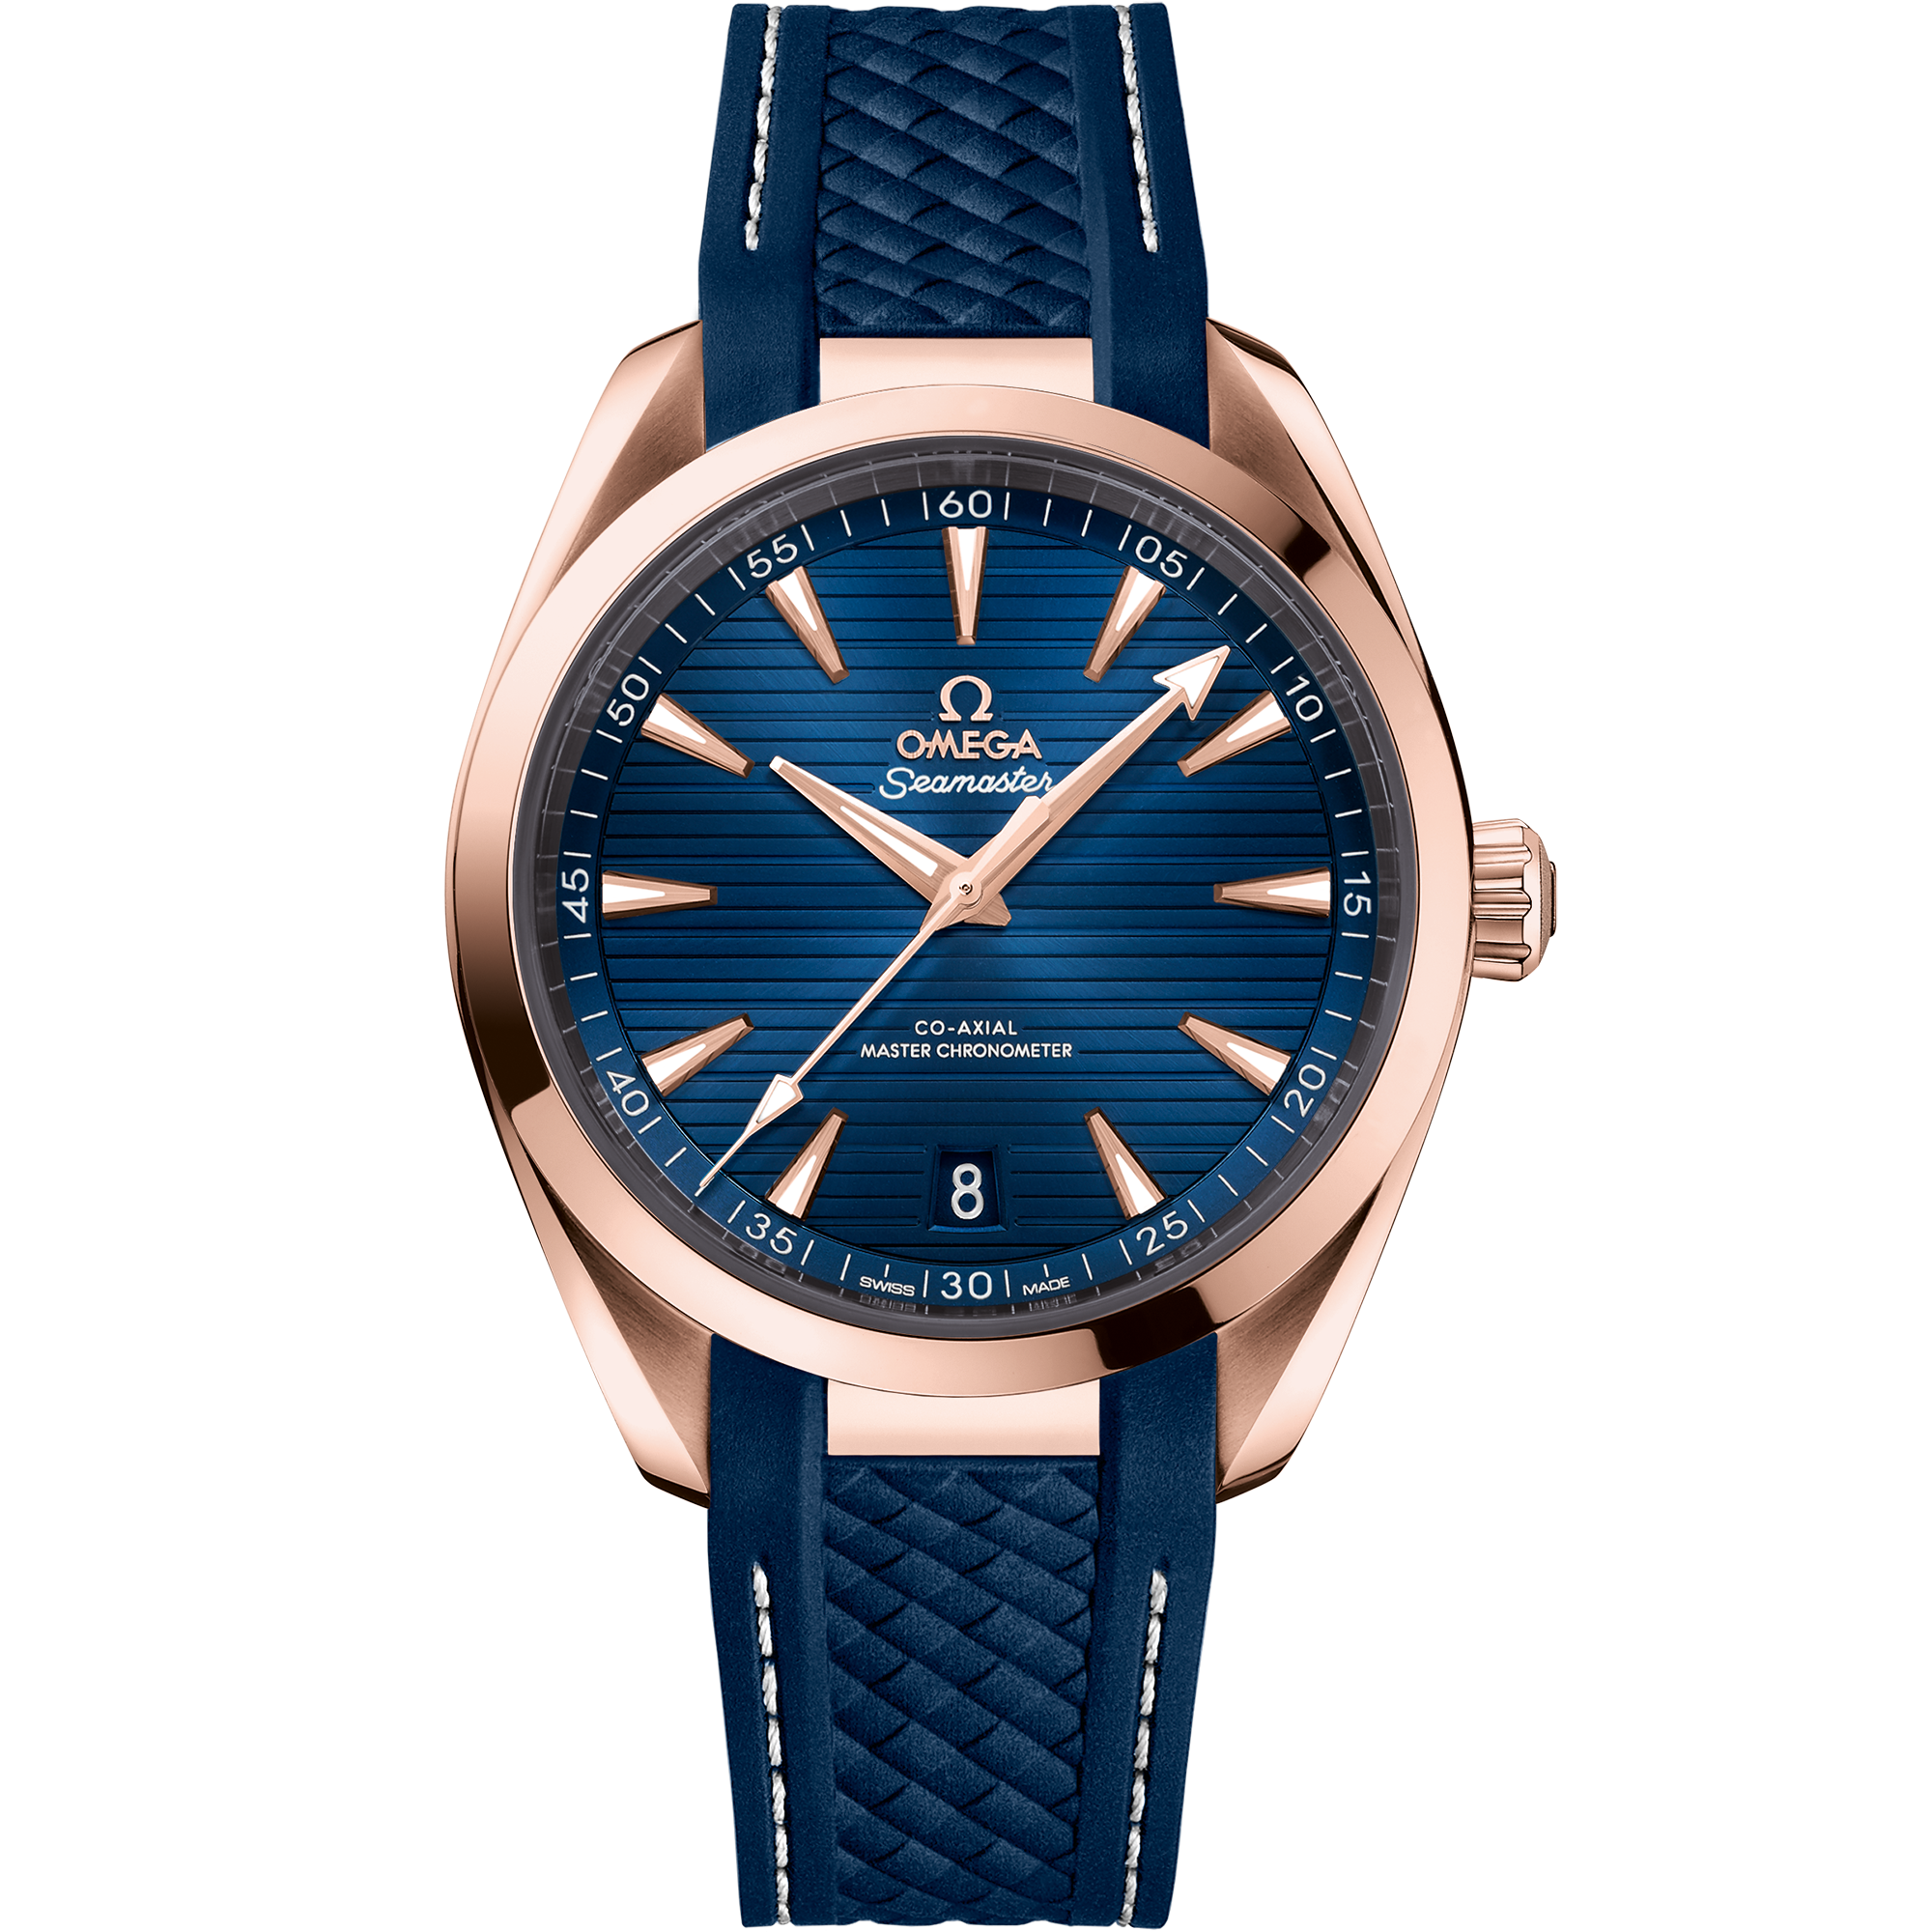 Seamaster 41 mm, Sedna™ gold on rubber strap - 220.52.41.21.03.001